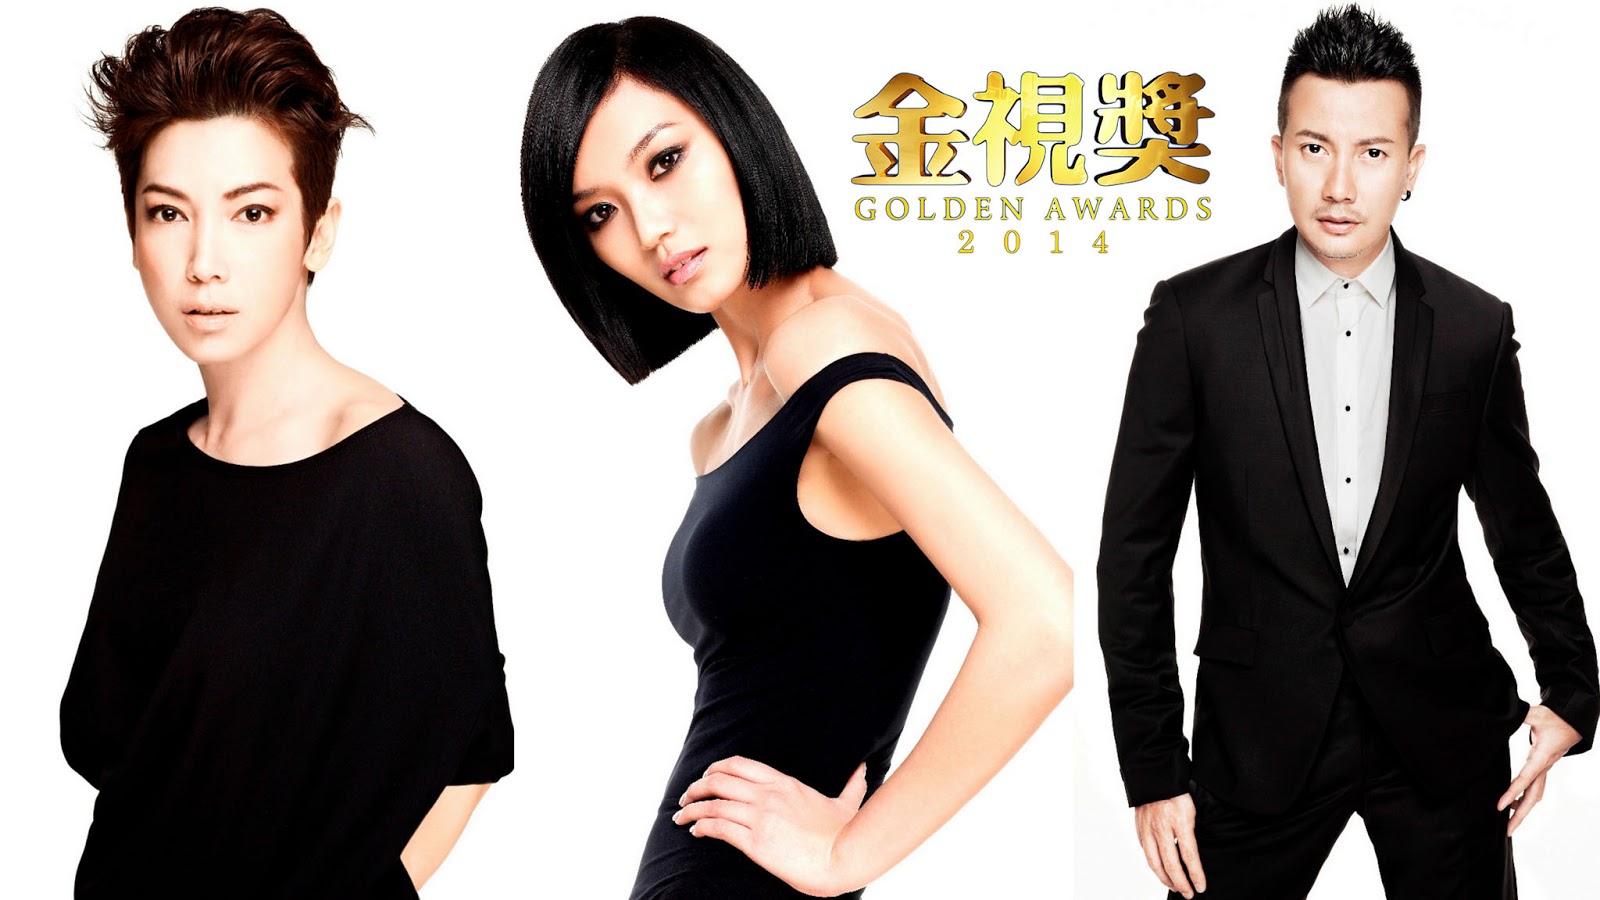 Kym Ng 钟琴, Joanne Peh 白薇秀 and Chen Han Wei 陈汉玮 coming to Golden Awards 2014